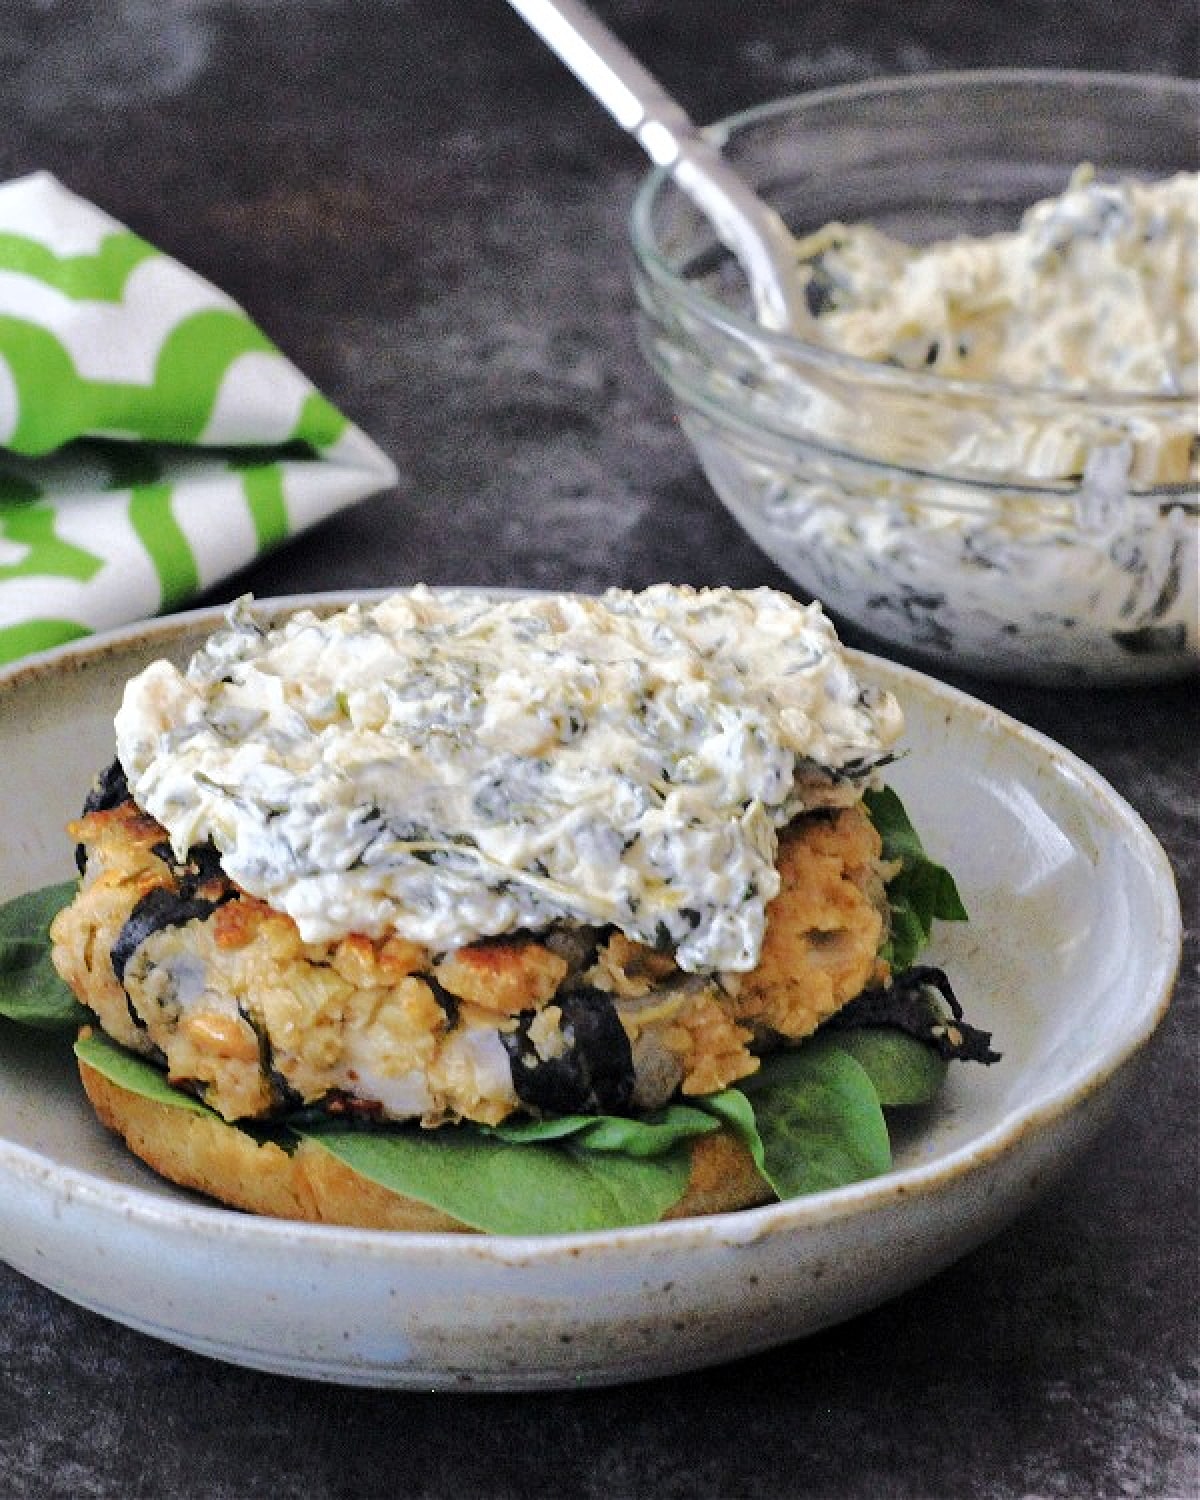 A veggie burger sits on a bun with fresh spinach. The burger is topped with spinach dip, and there is a small glass bowl of spinach dip next to the plate with the burger.